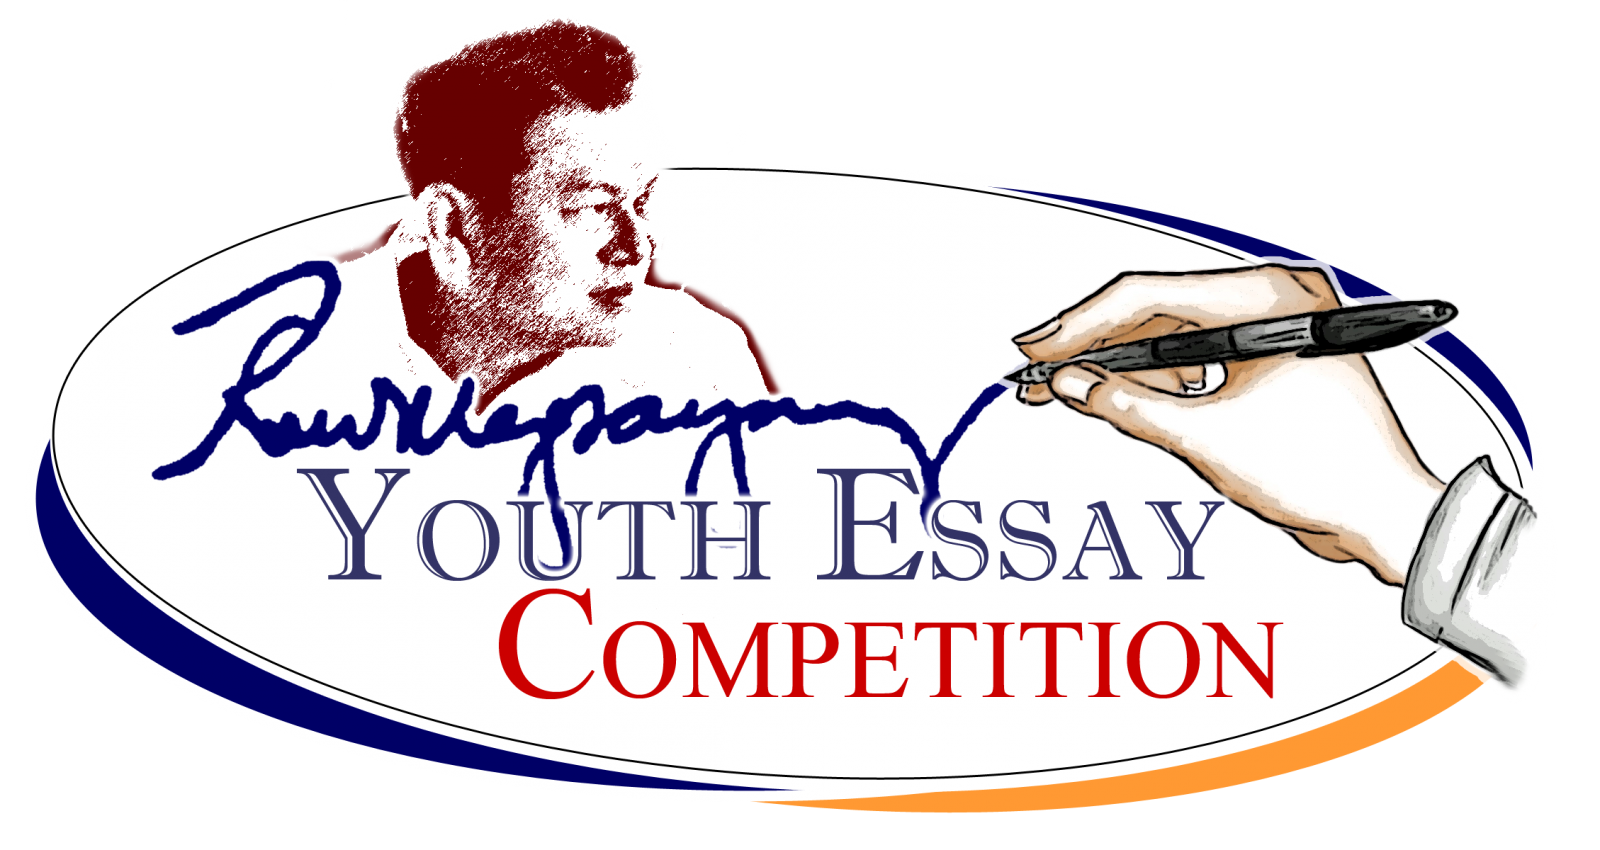 Peace essay competition